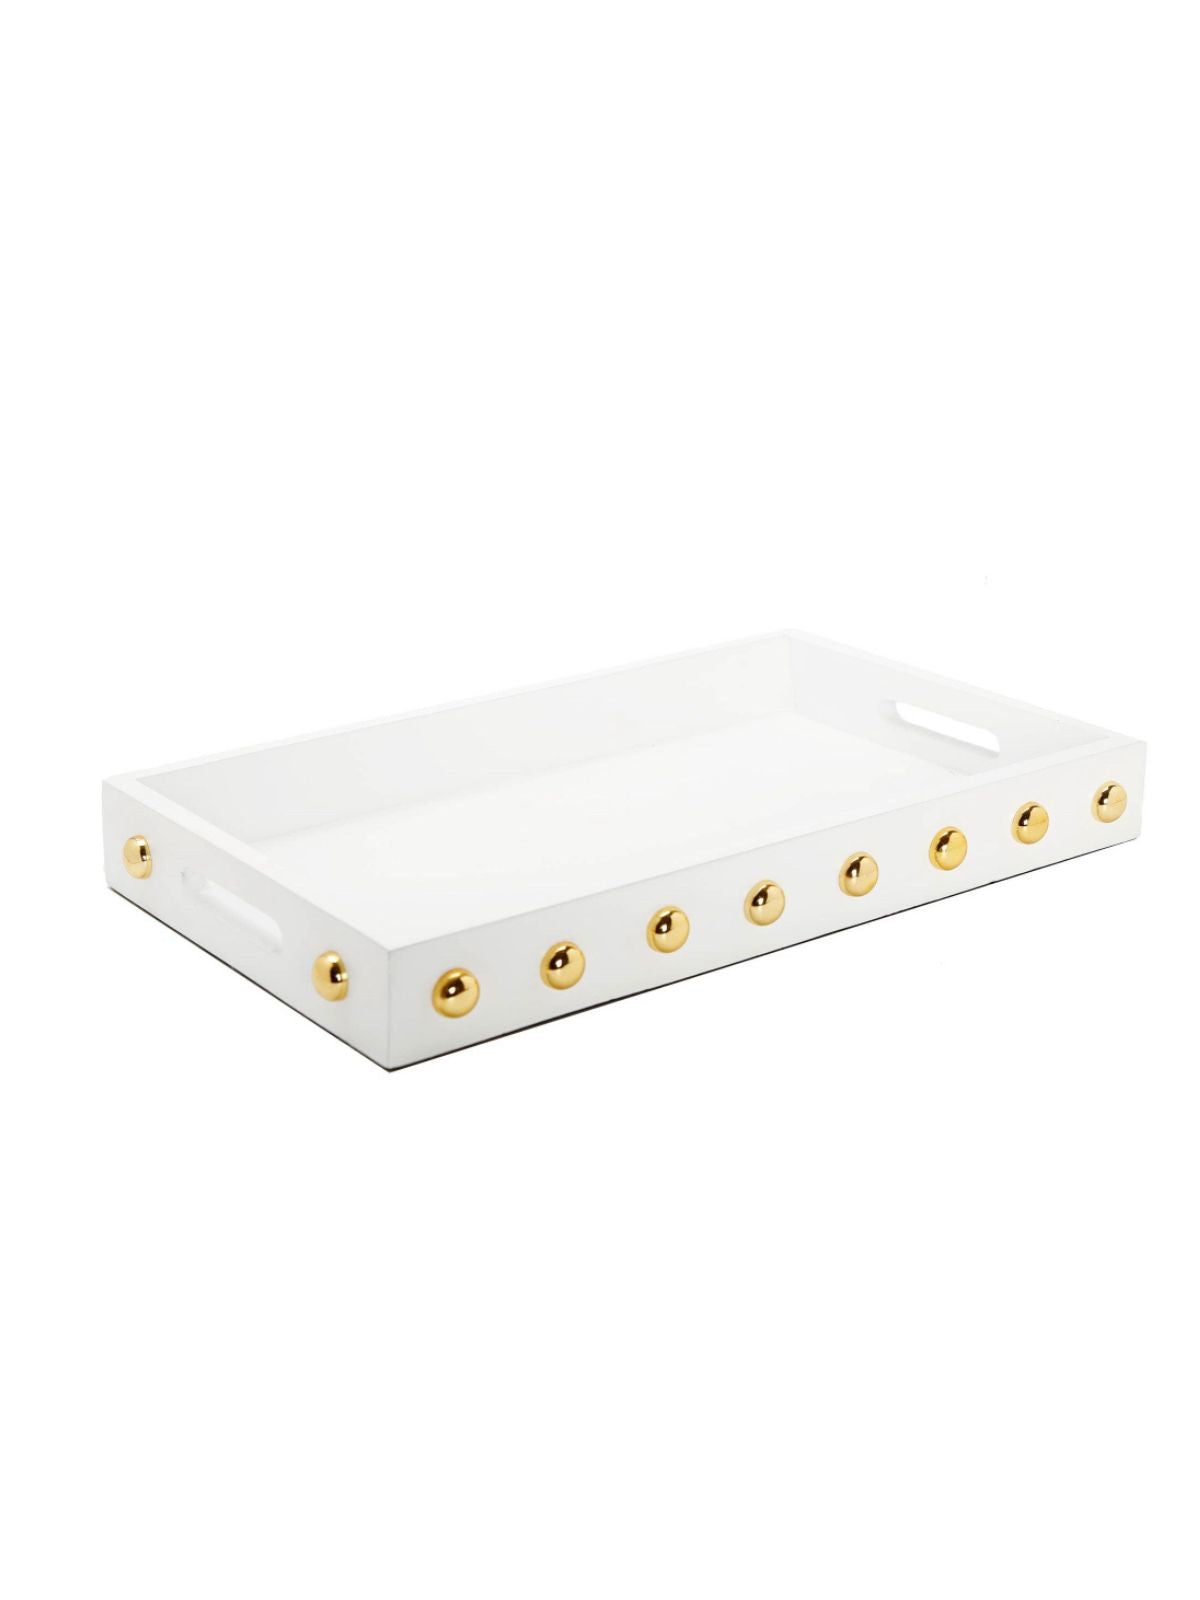 This stunning wooden tray with its shiny gold studs is a statement maker. Available in 3 colors to blend with any home décor style! Measures 16L Sold at KYA Home Decor